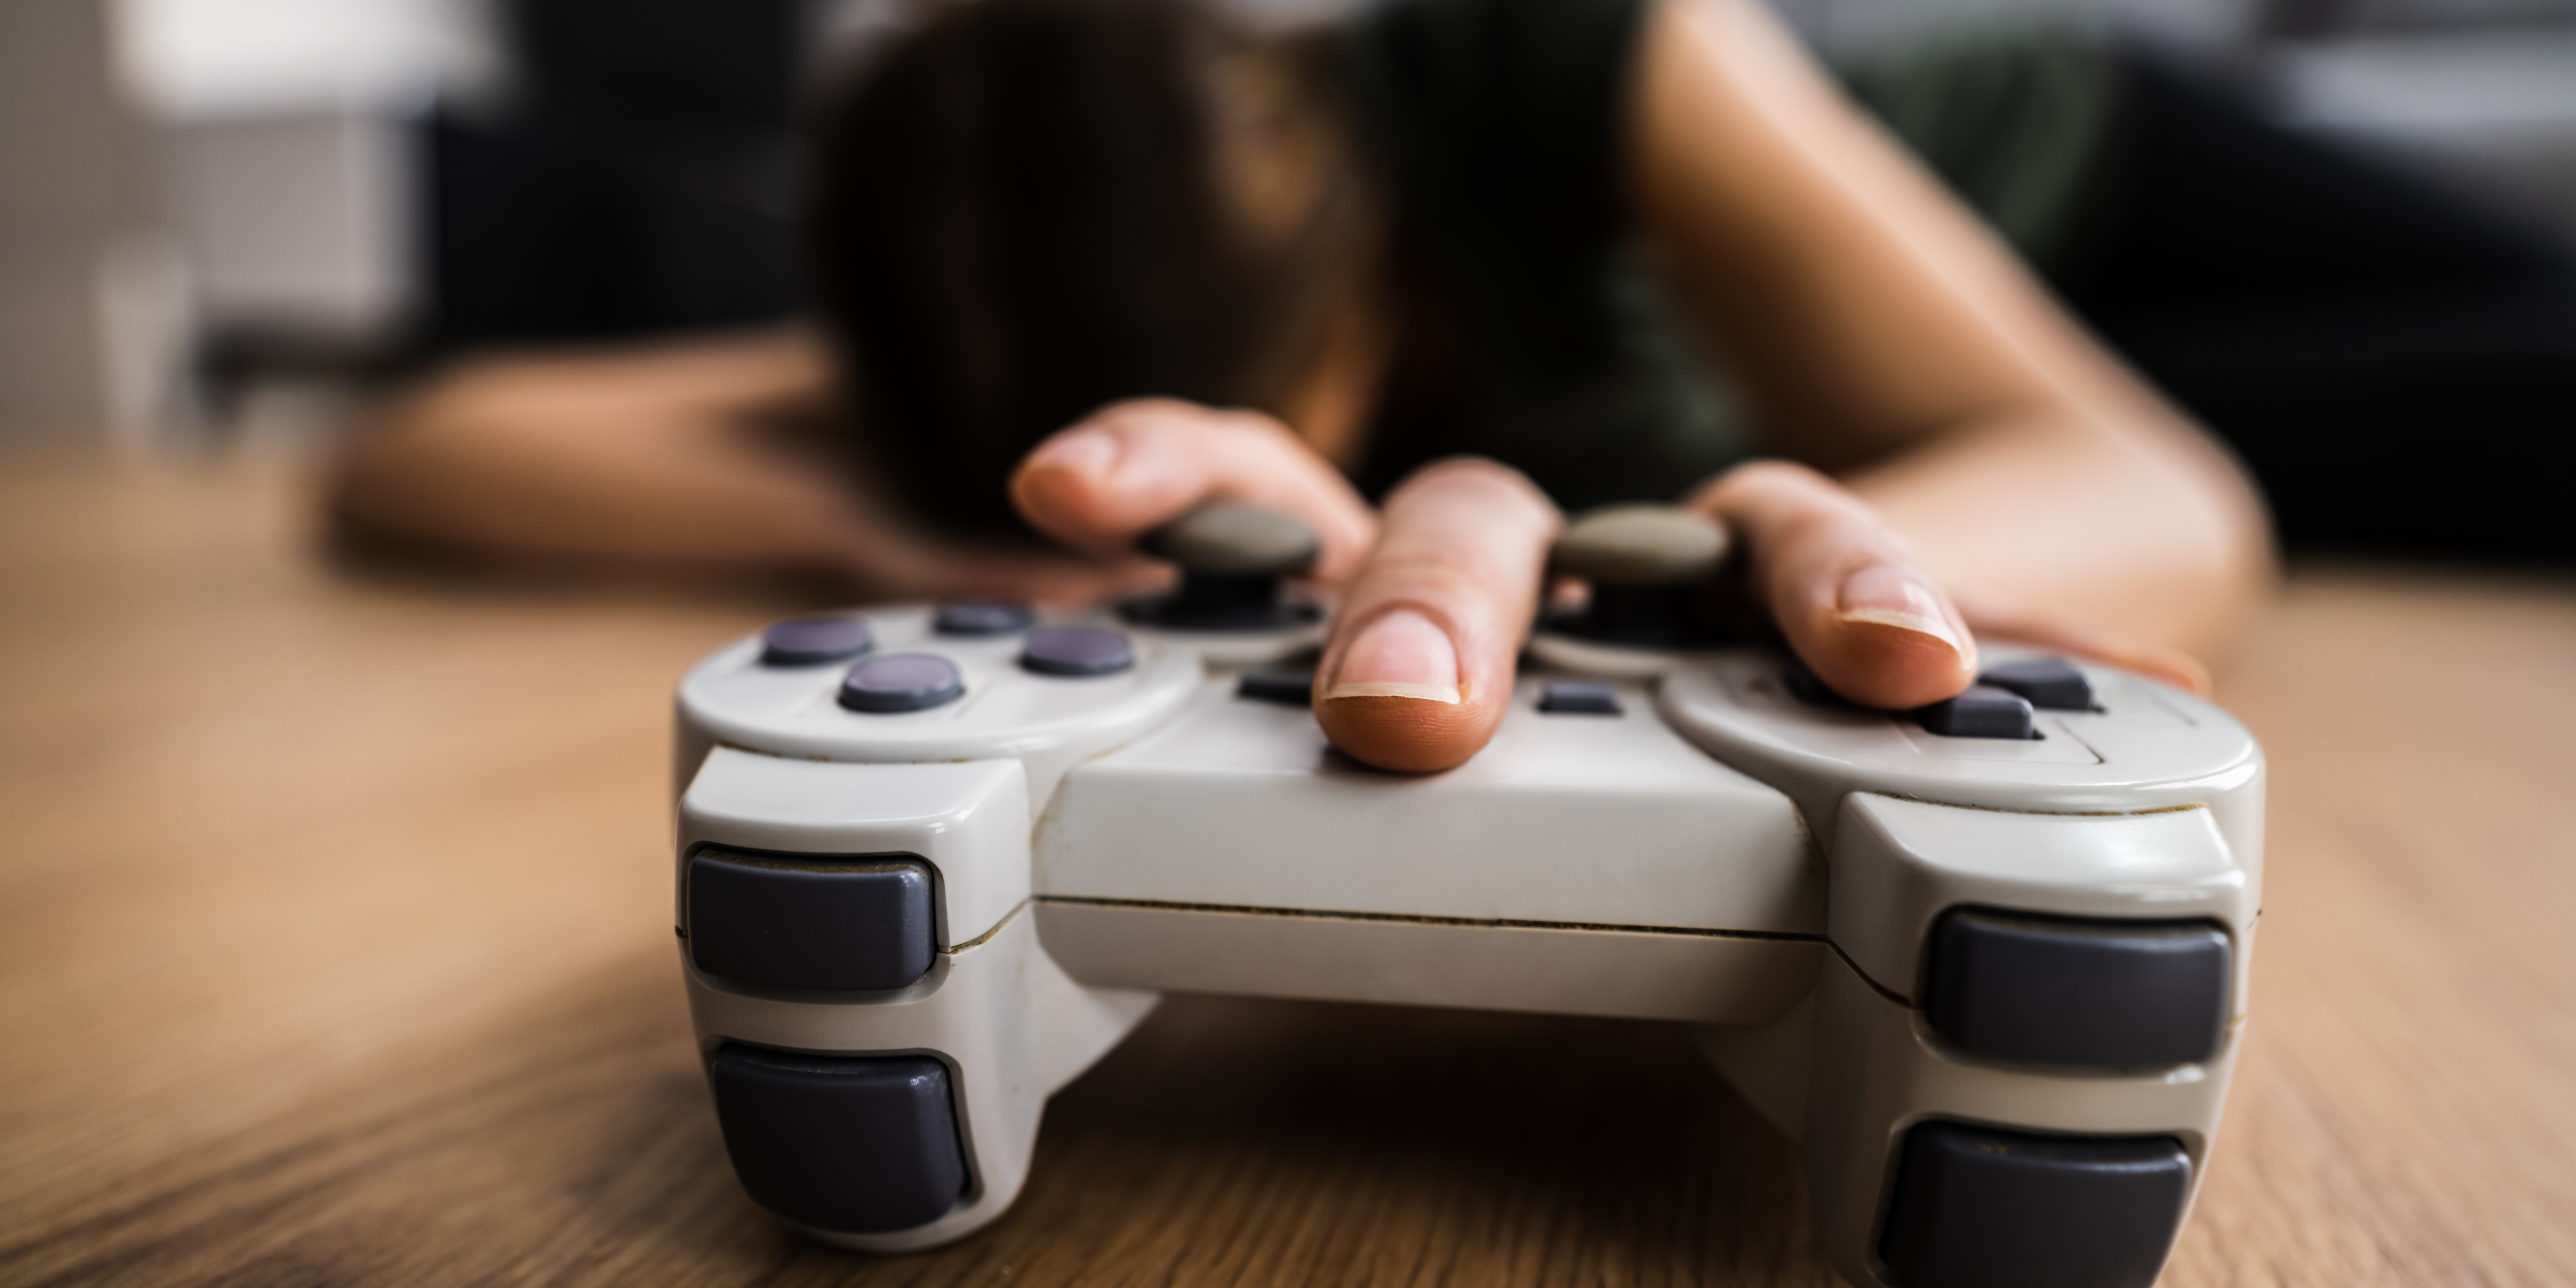 Is Gaming Addiction Real?